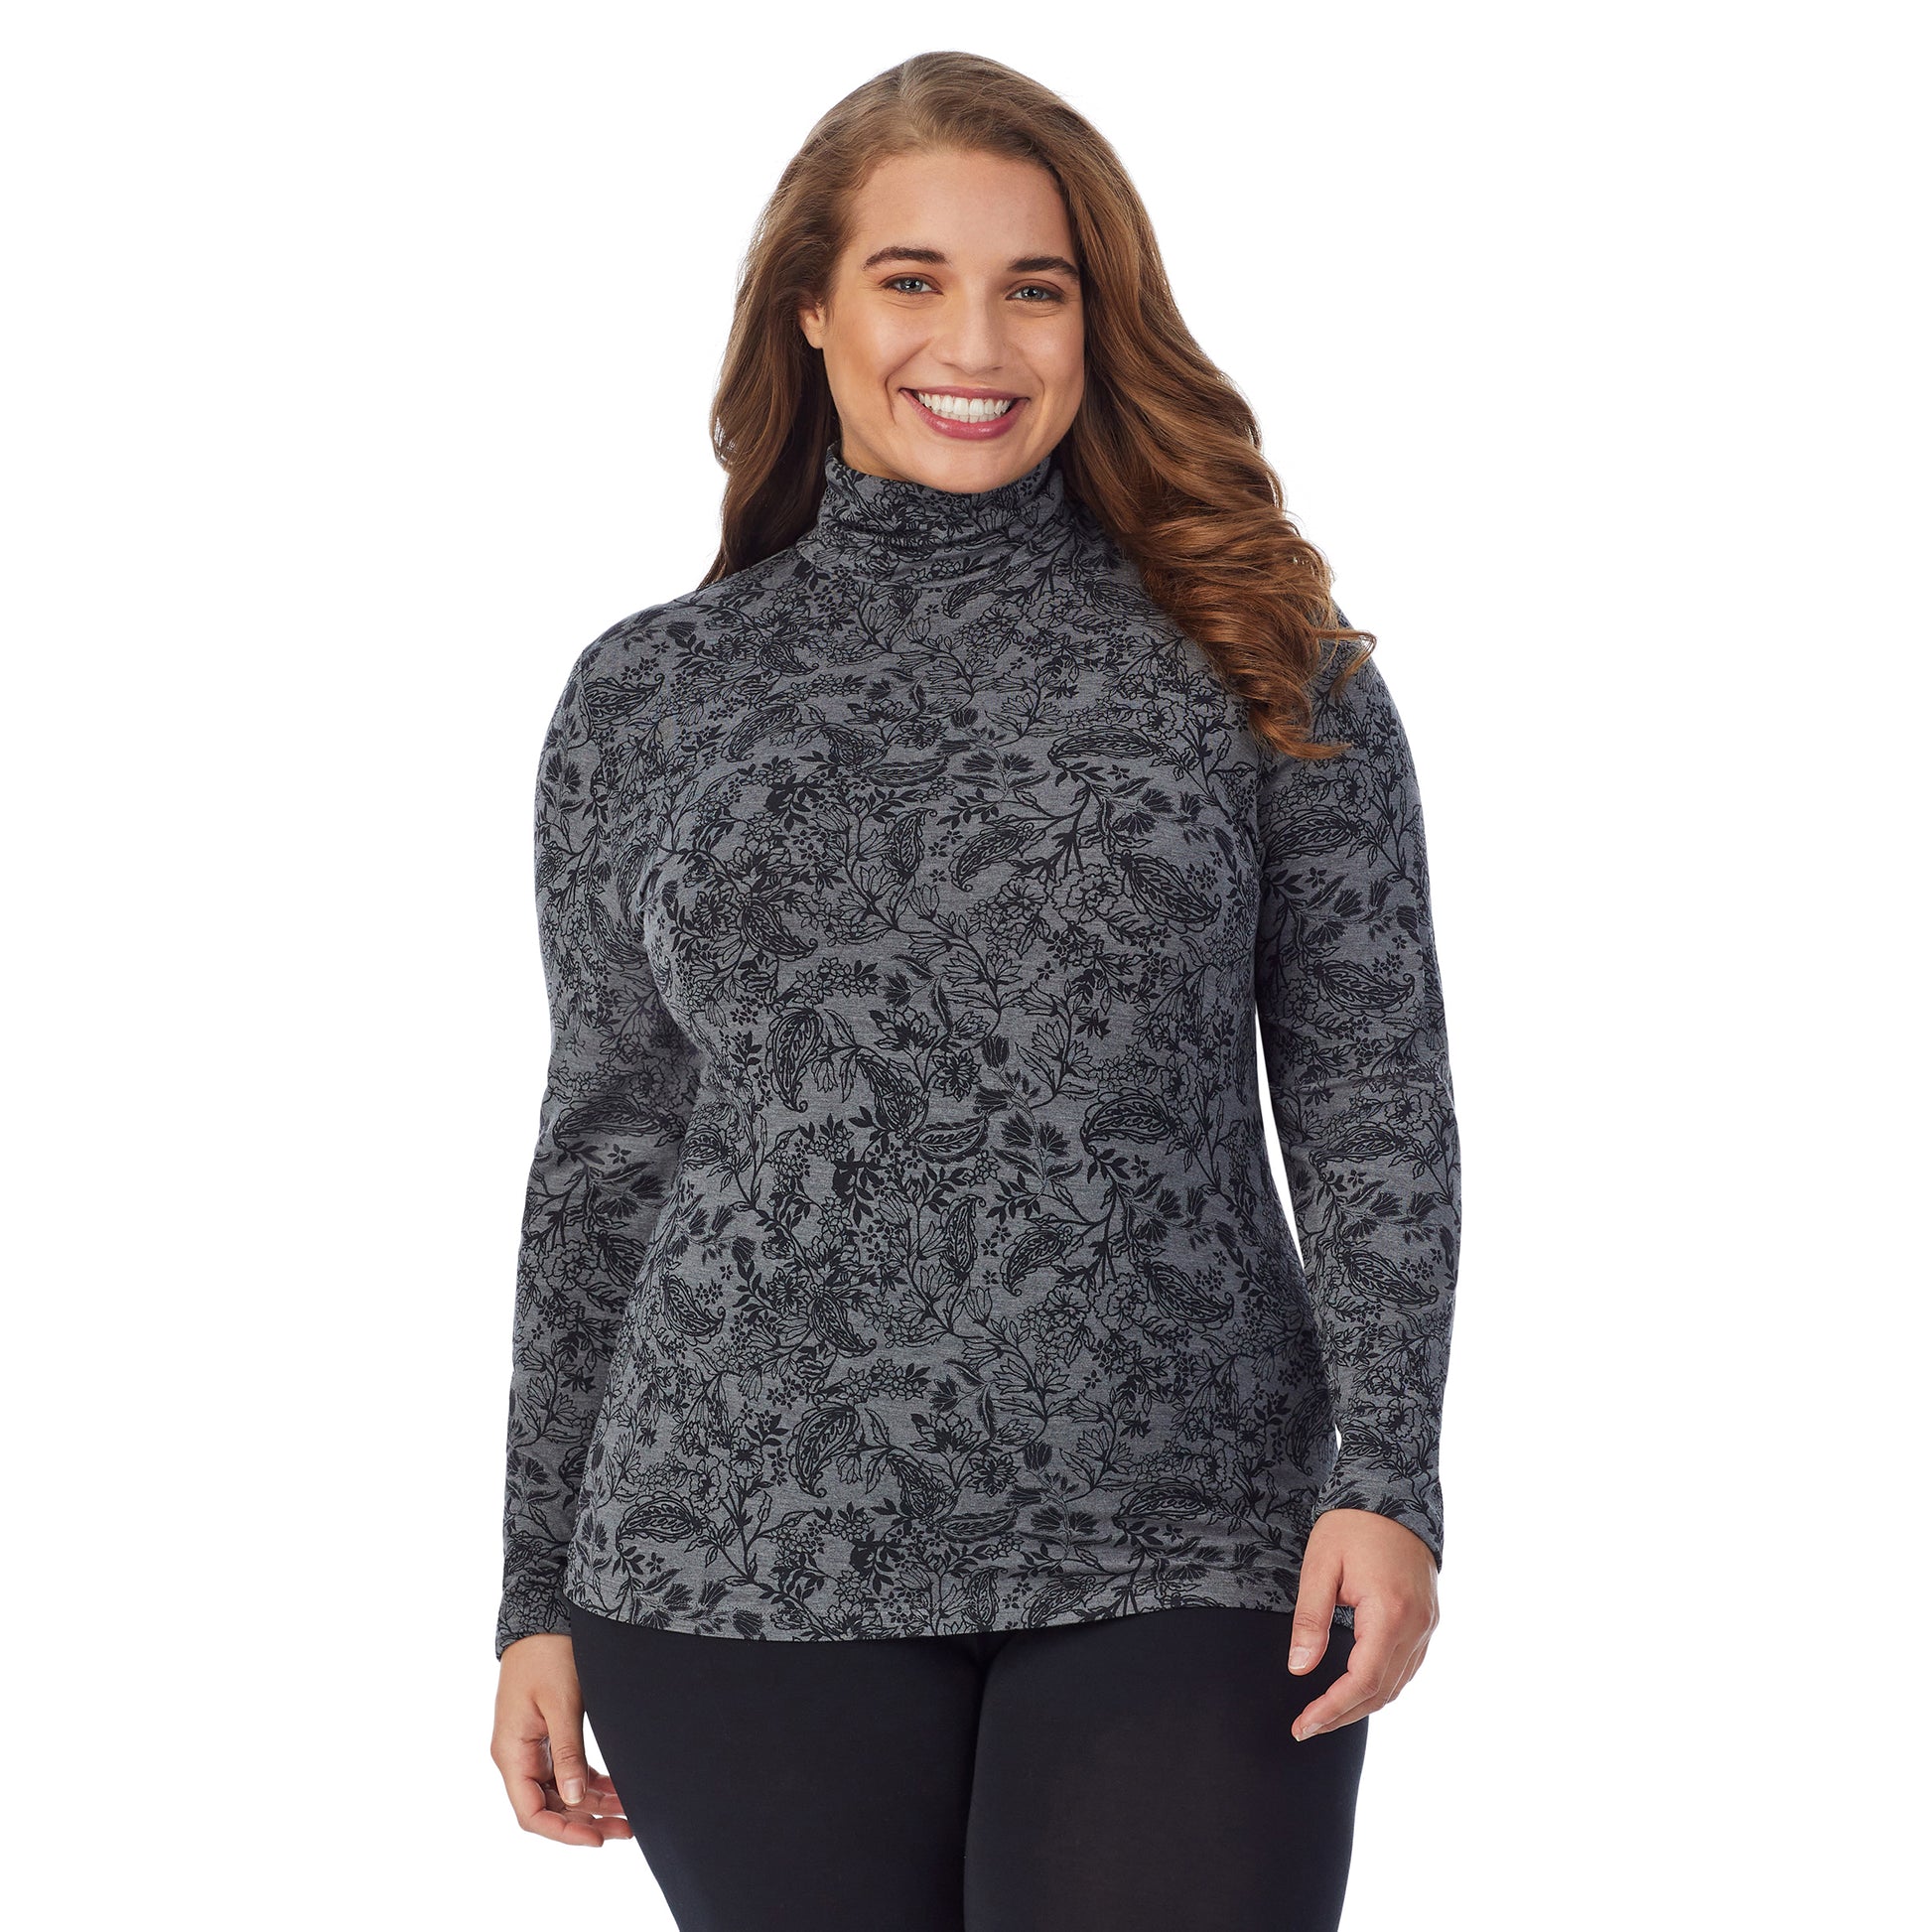 Heather Grey Paisley; Model is wearing size 1X. She is 5'7", Bust 42.5", Waist 34.5", Hips 46". @A lady wearing a heather grey paisley long sleeve stretch turtleneck t-shirt plus.